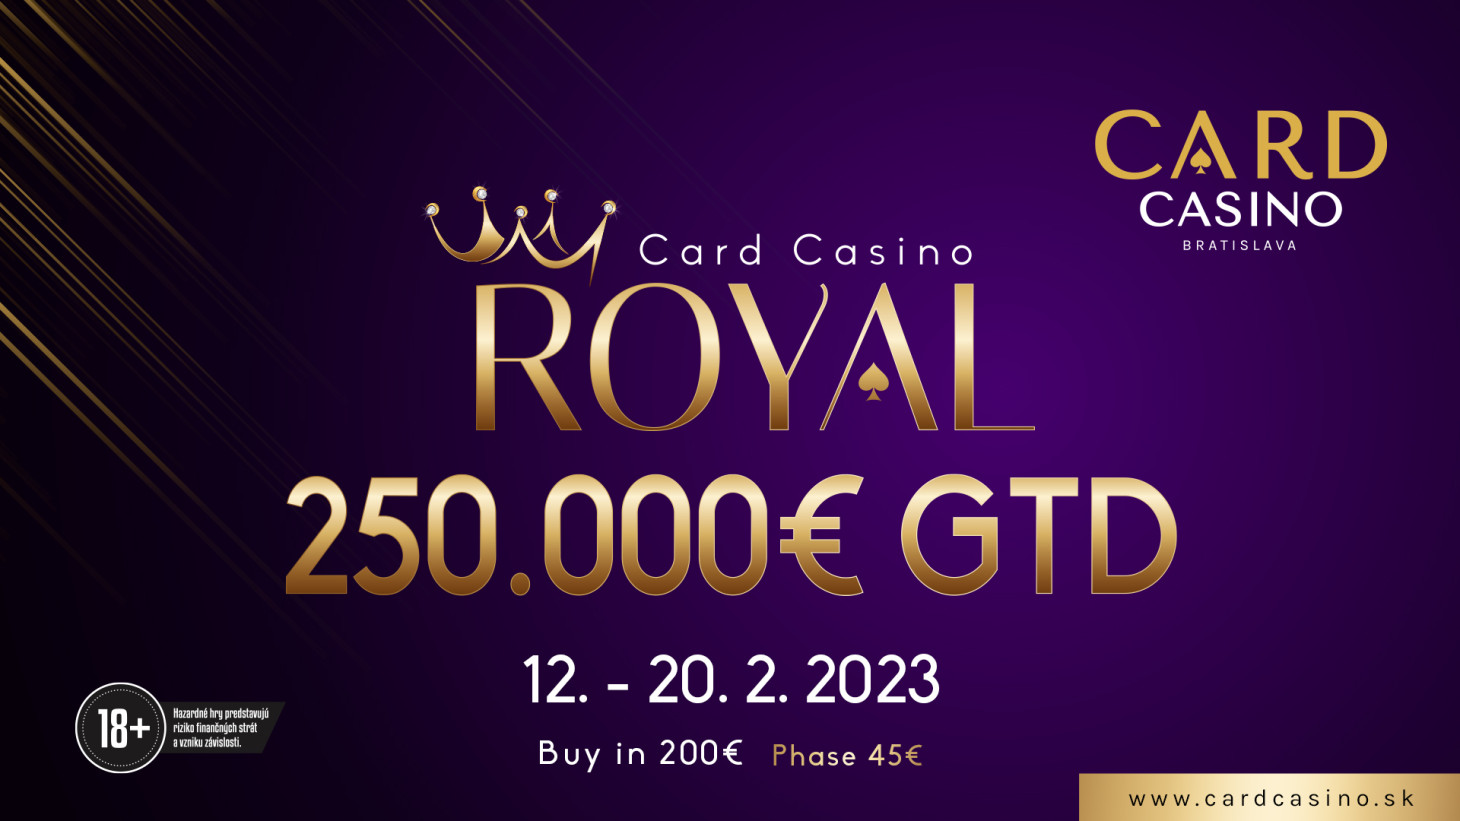 The Royal will once again fill the poker tables. In February, €250,000 GTD will be up for grabs!